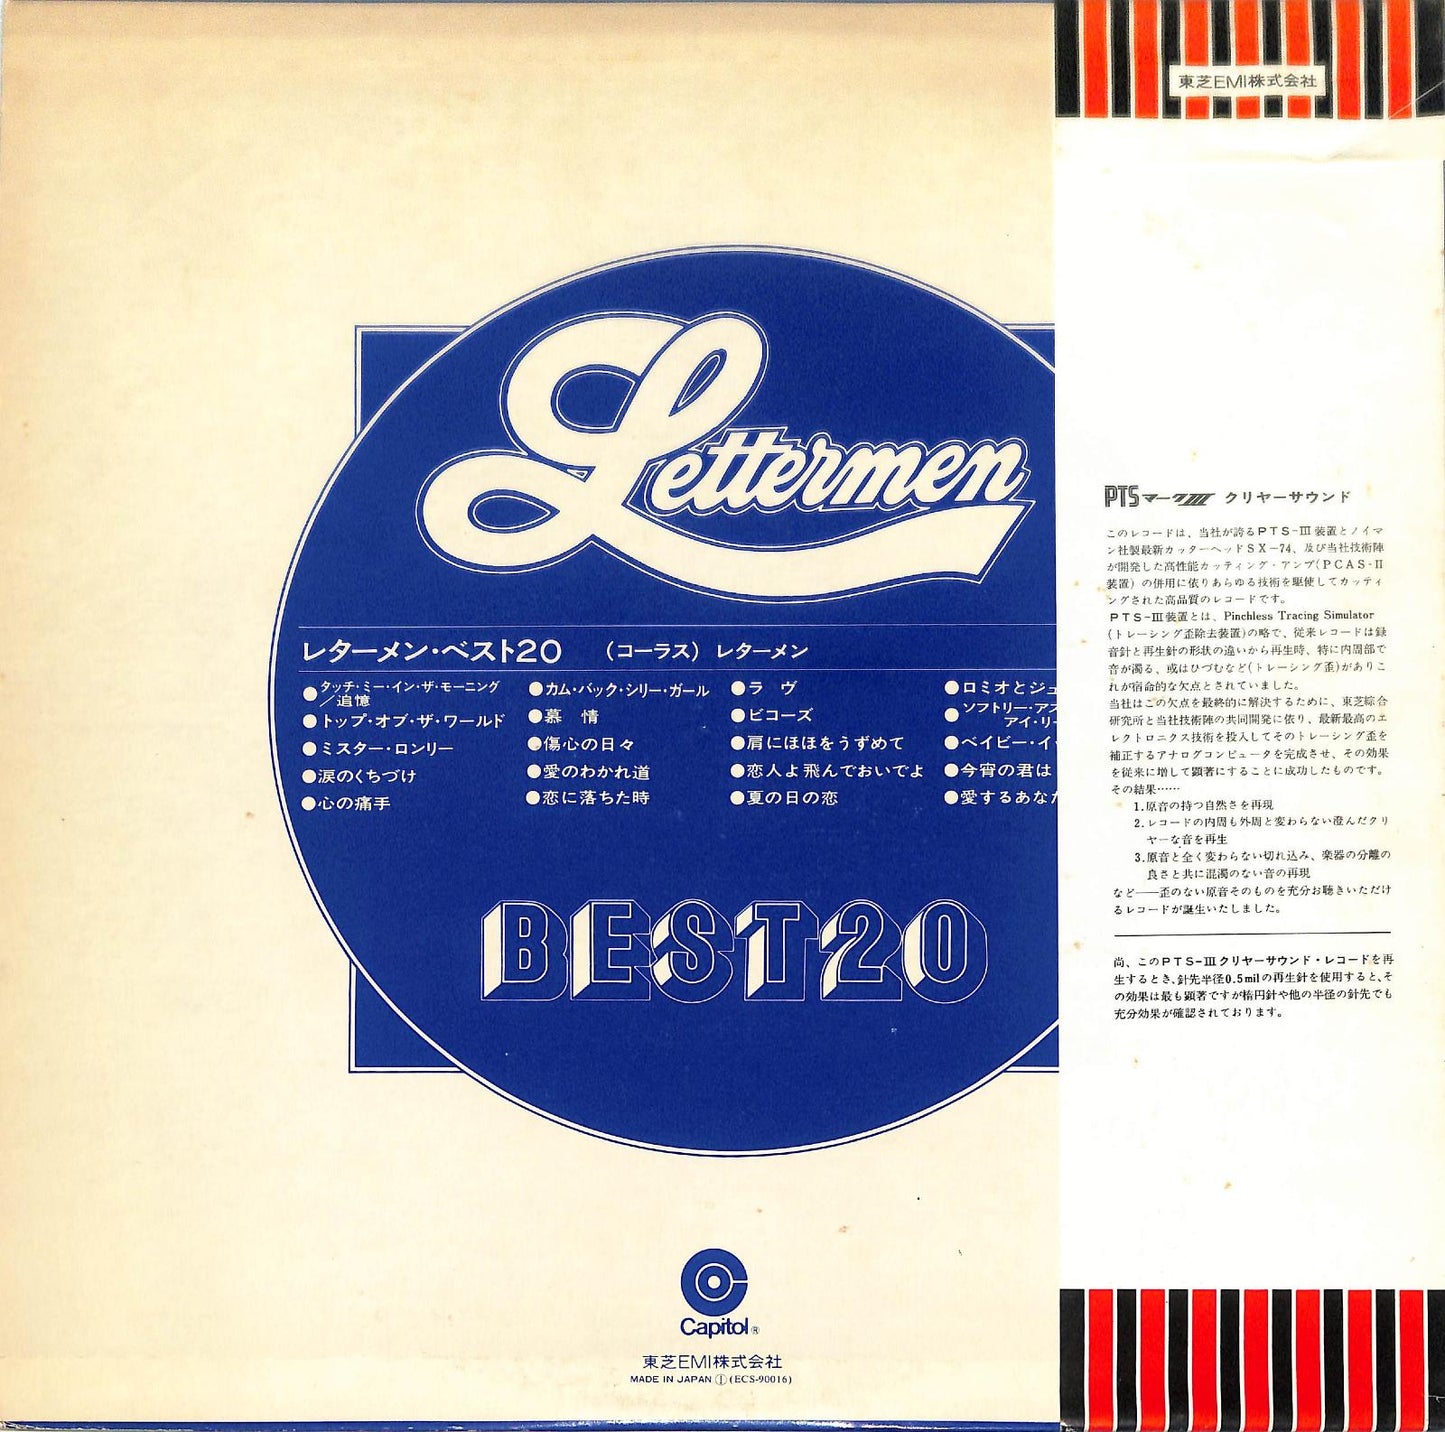 "Lettermen Best 20" by The Lettermen, is a compilation that encapsulates the group's smooth vocal harmonies and romantic balladry. This collection features some of their most beloved tracks, showcasing their signature blend of pop and easy listening styles. The Lettermen, celebrated for their harmonious renditions and classic charm, offer a nostalgic journey through their most memorable songs, highlighting their enduring appeal in the world of vocal groups.